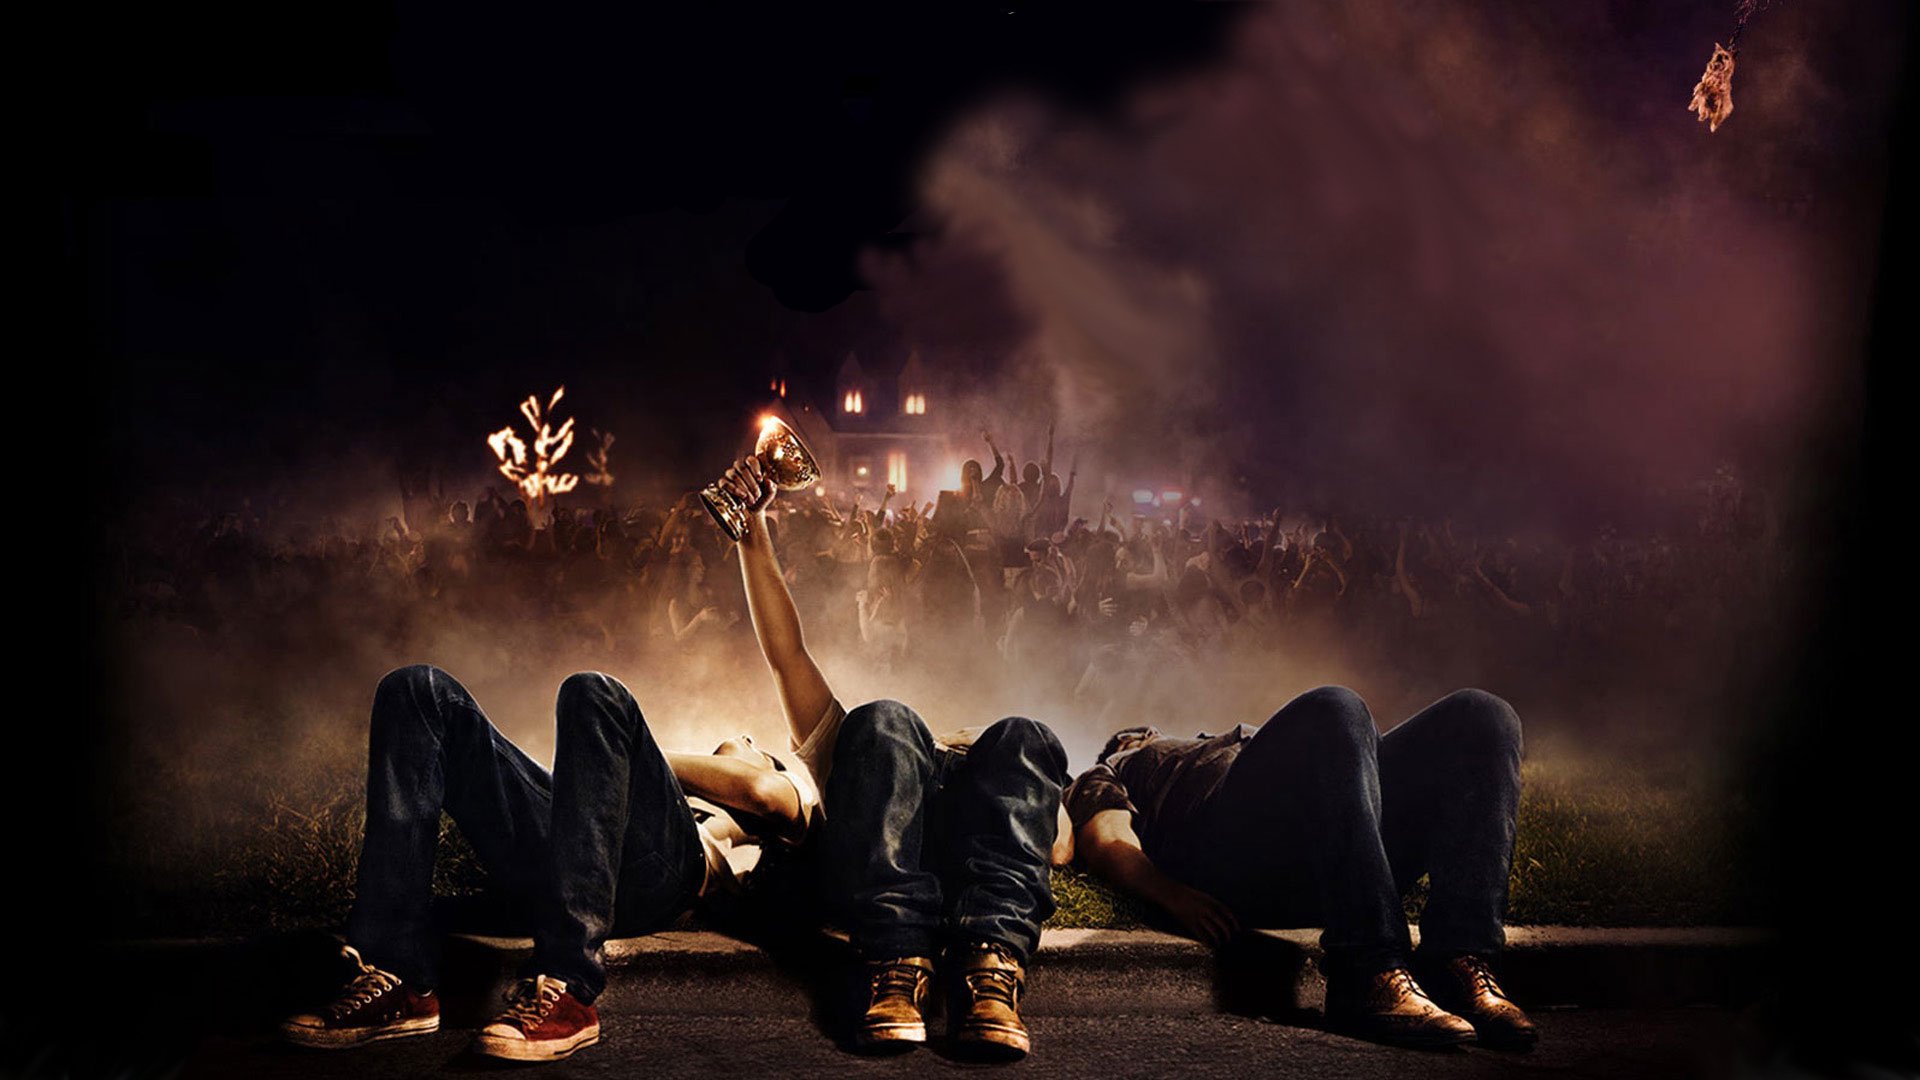 Project X Soundtrack Music - Complete Song List | Tunefind